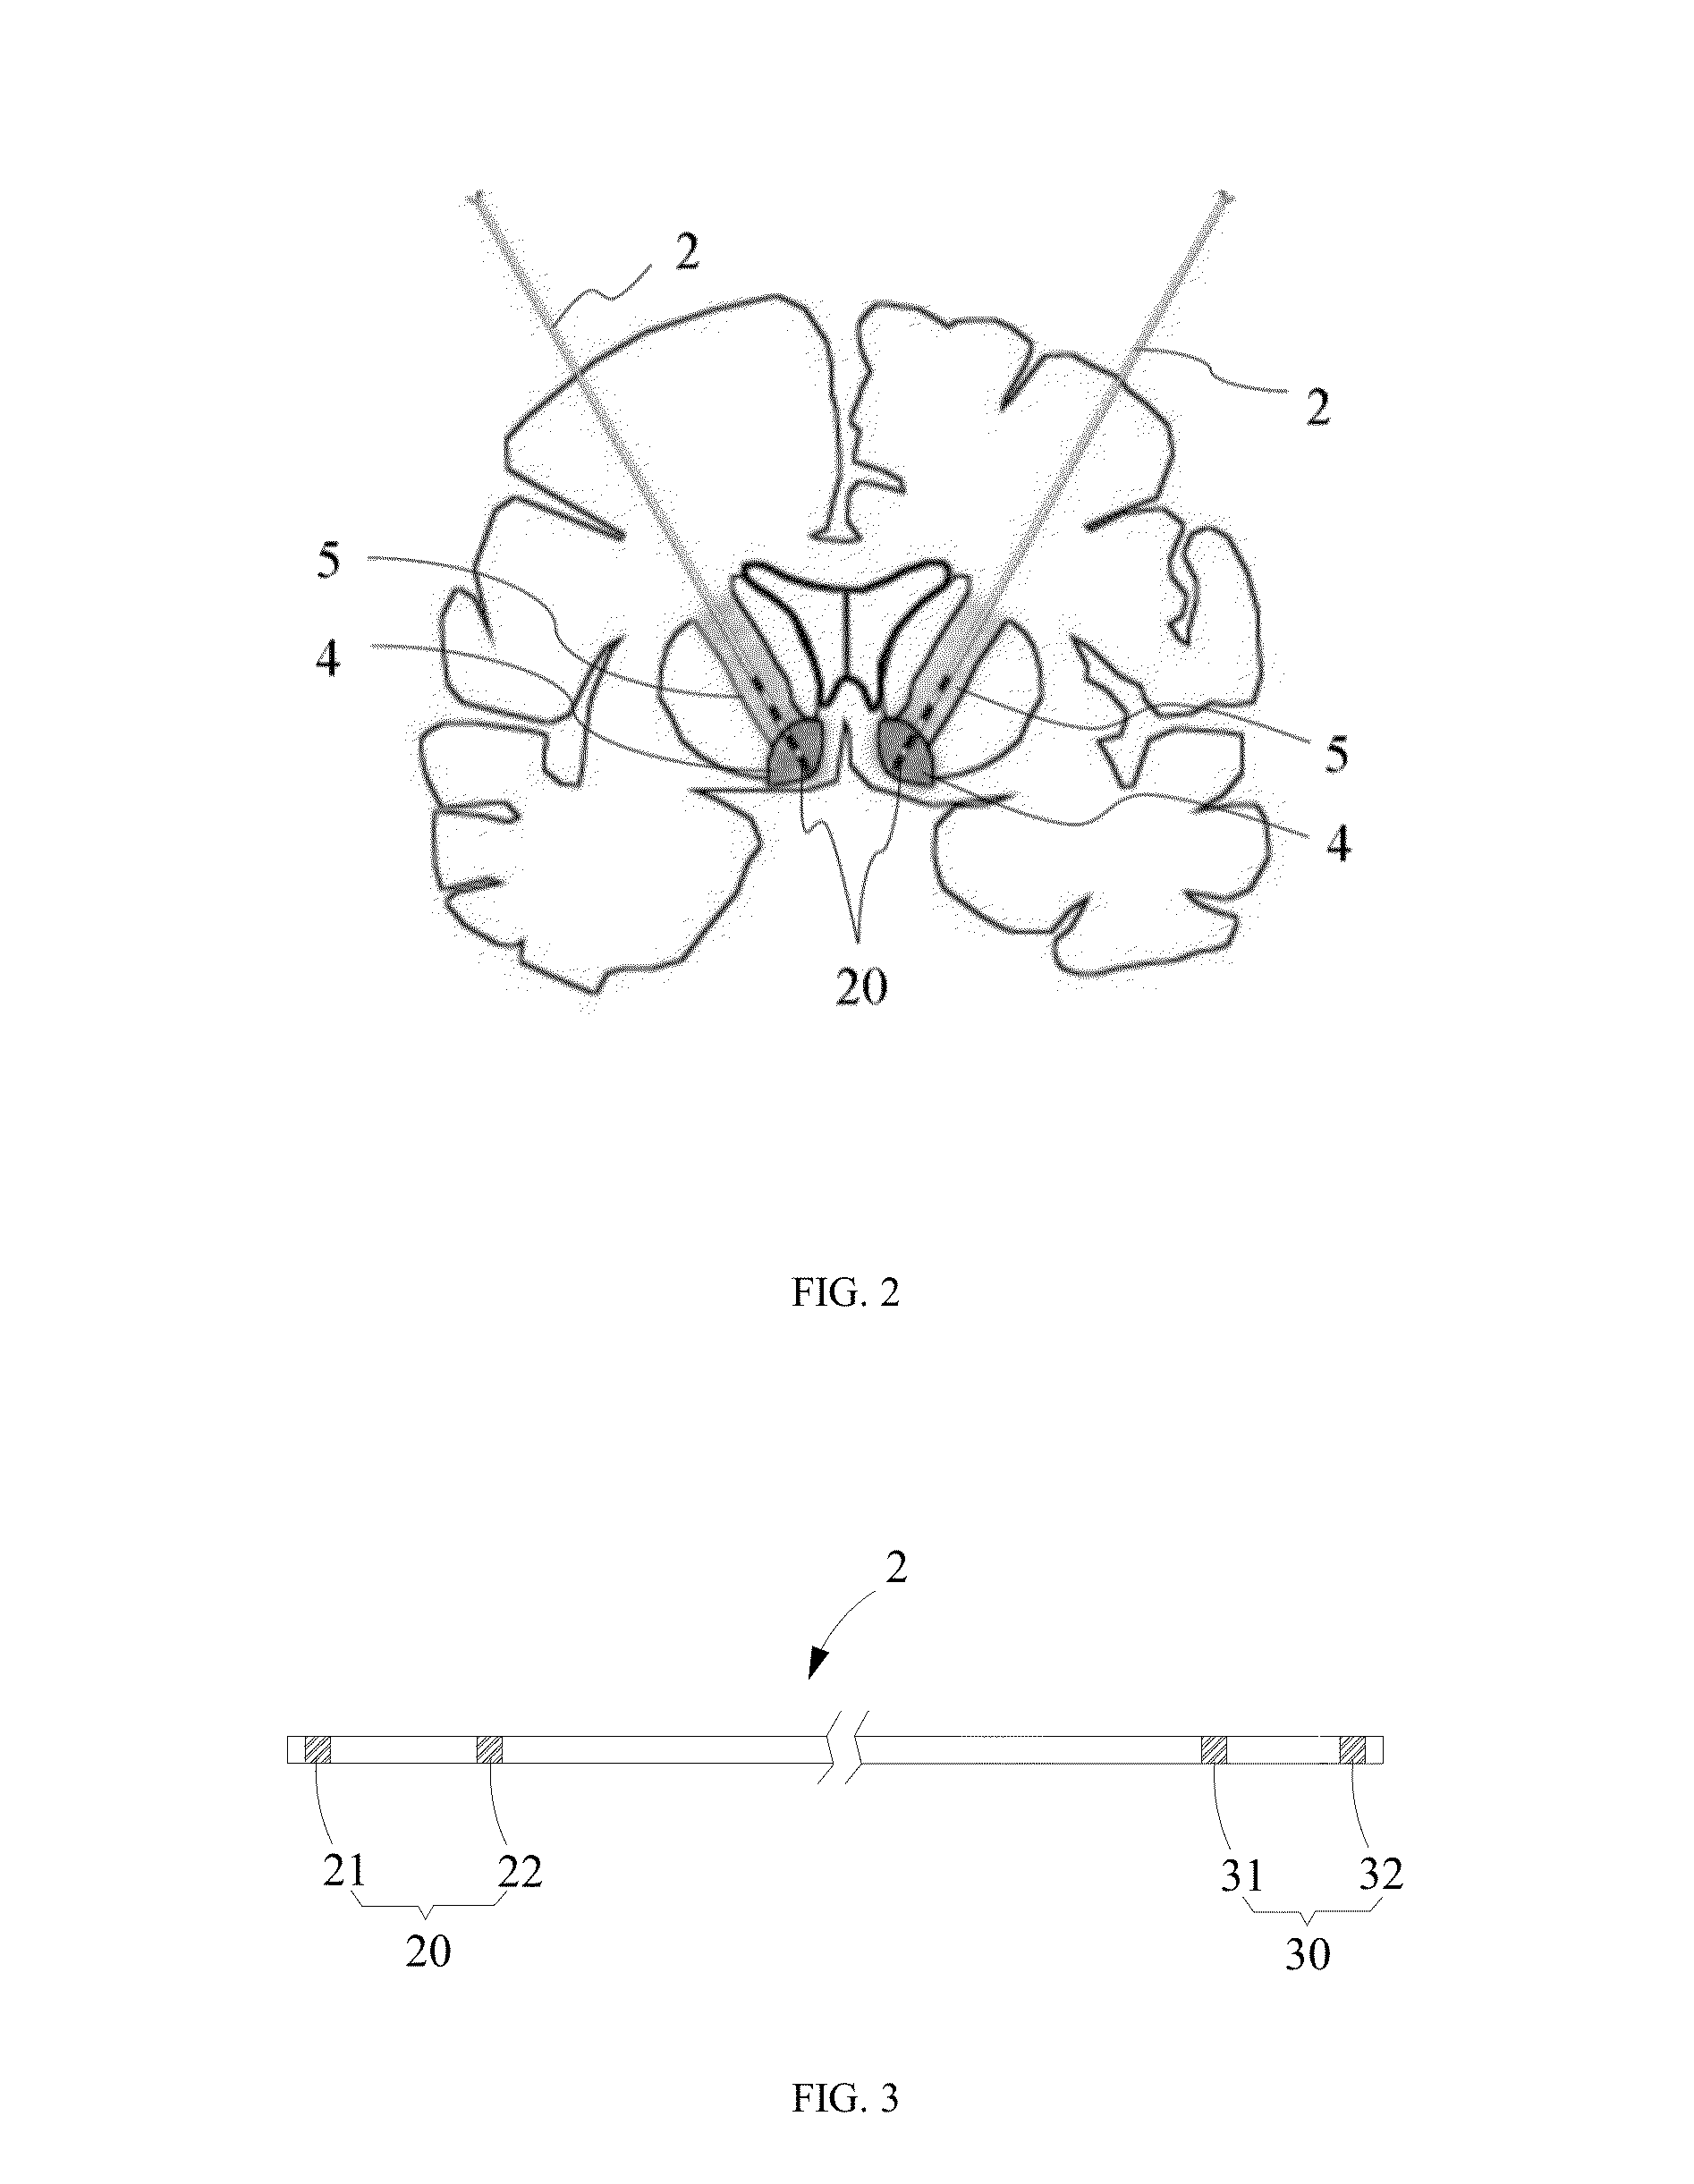 Lead, device and method for electrical stimulation of deep brain